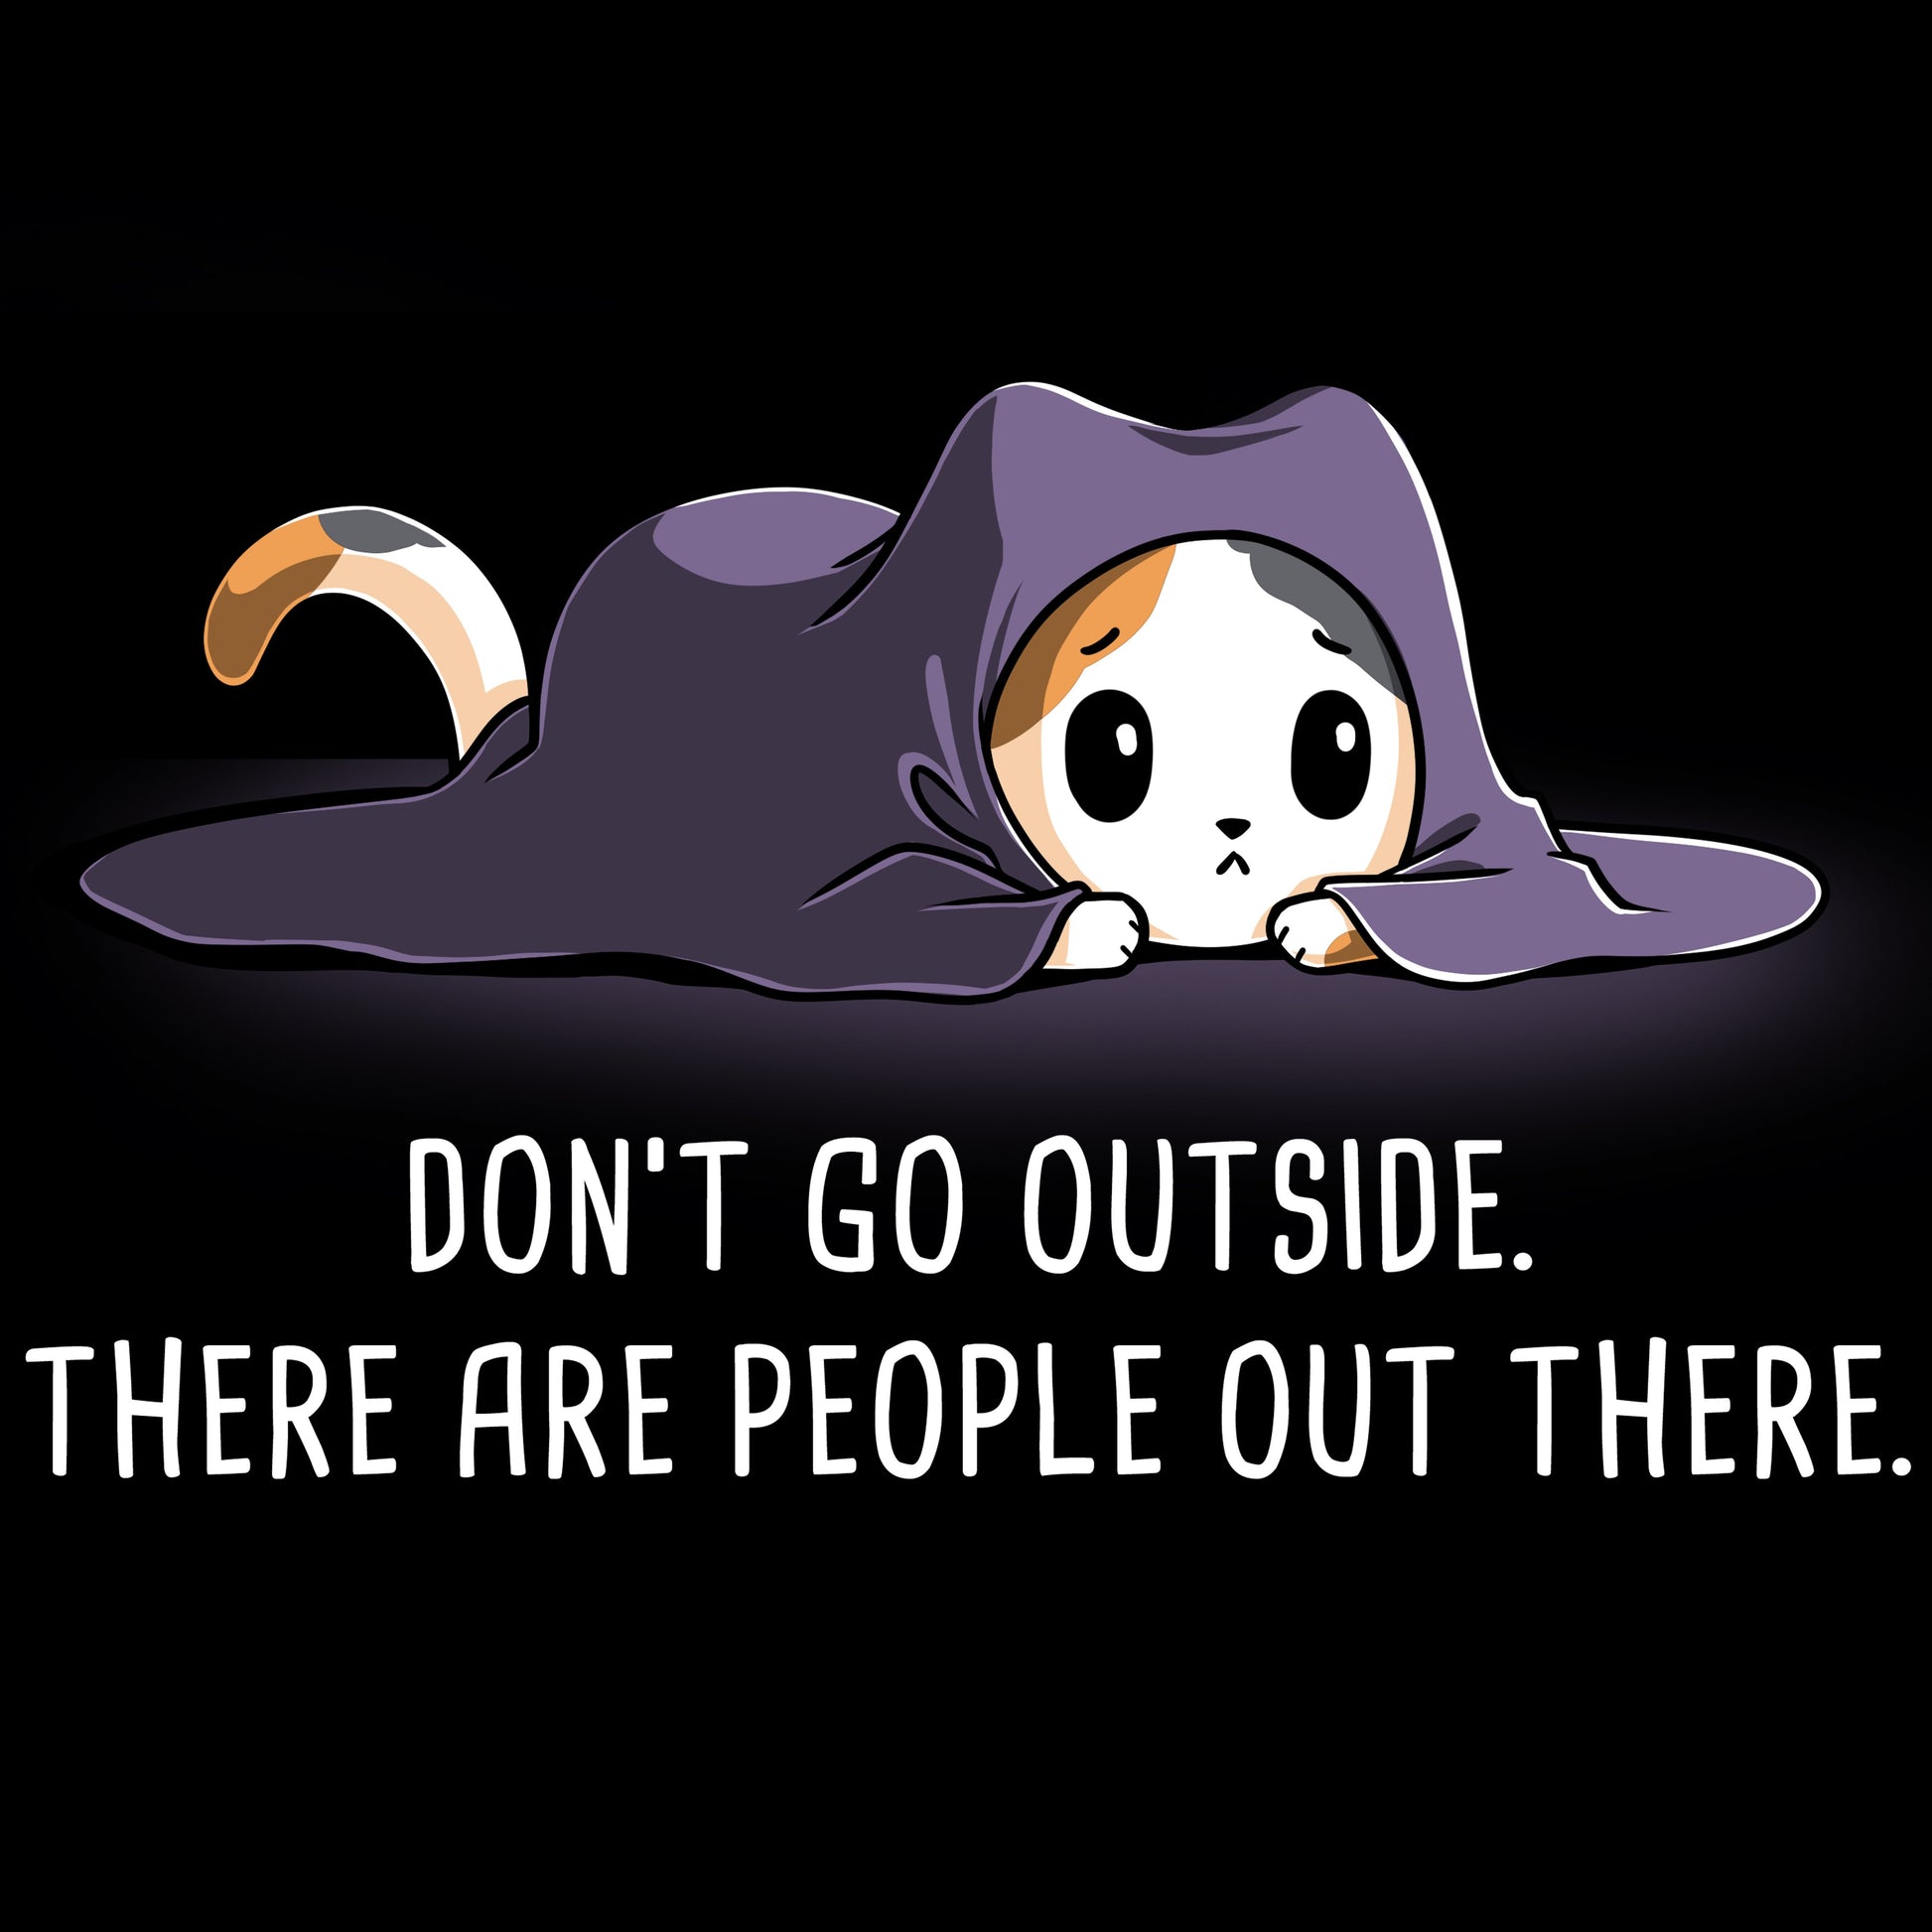 TeeTurtle's "Don't Go Outside" is a reminder to not go outside, as social creatures are out there.